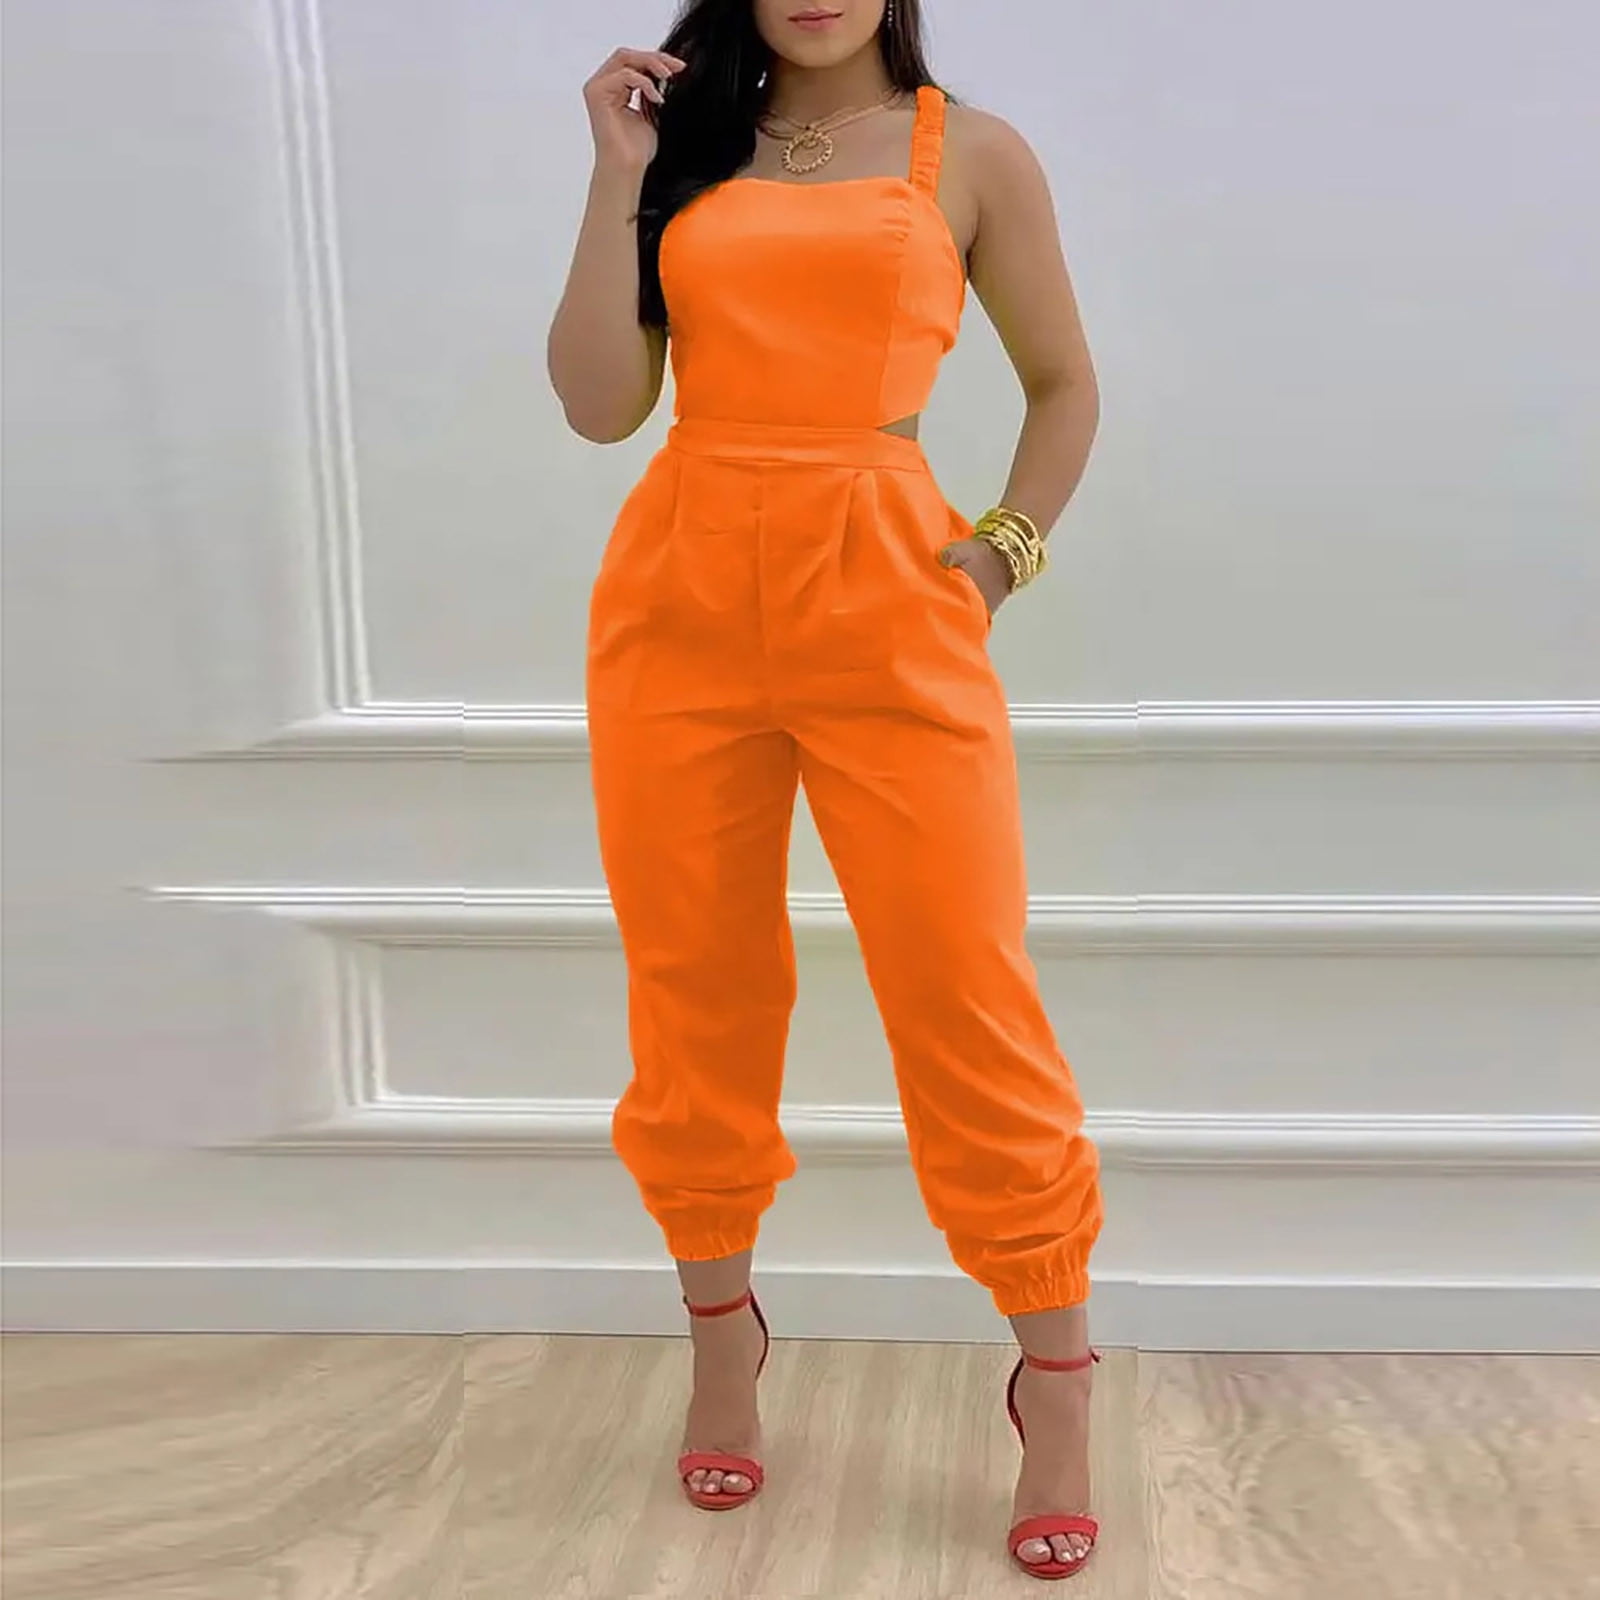 How to style jumpsuit?